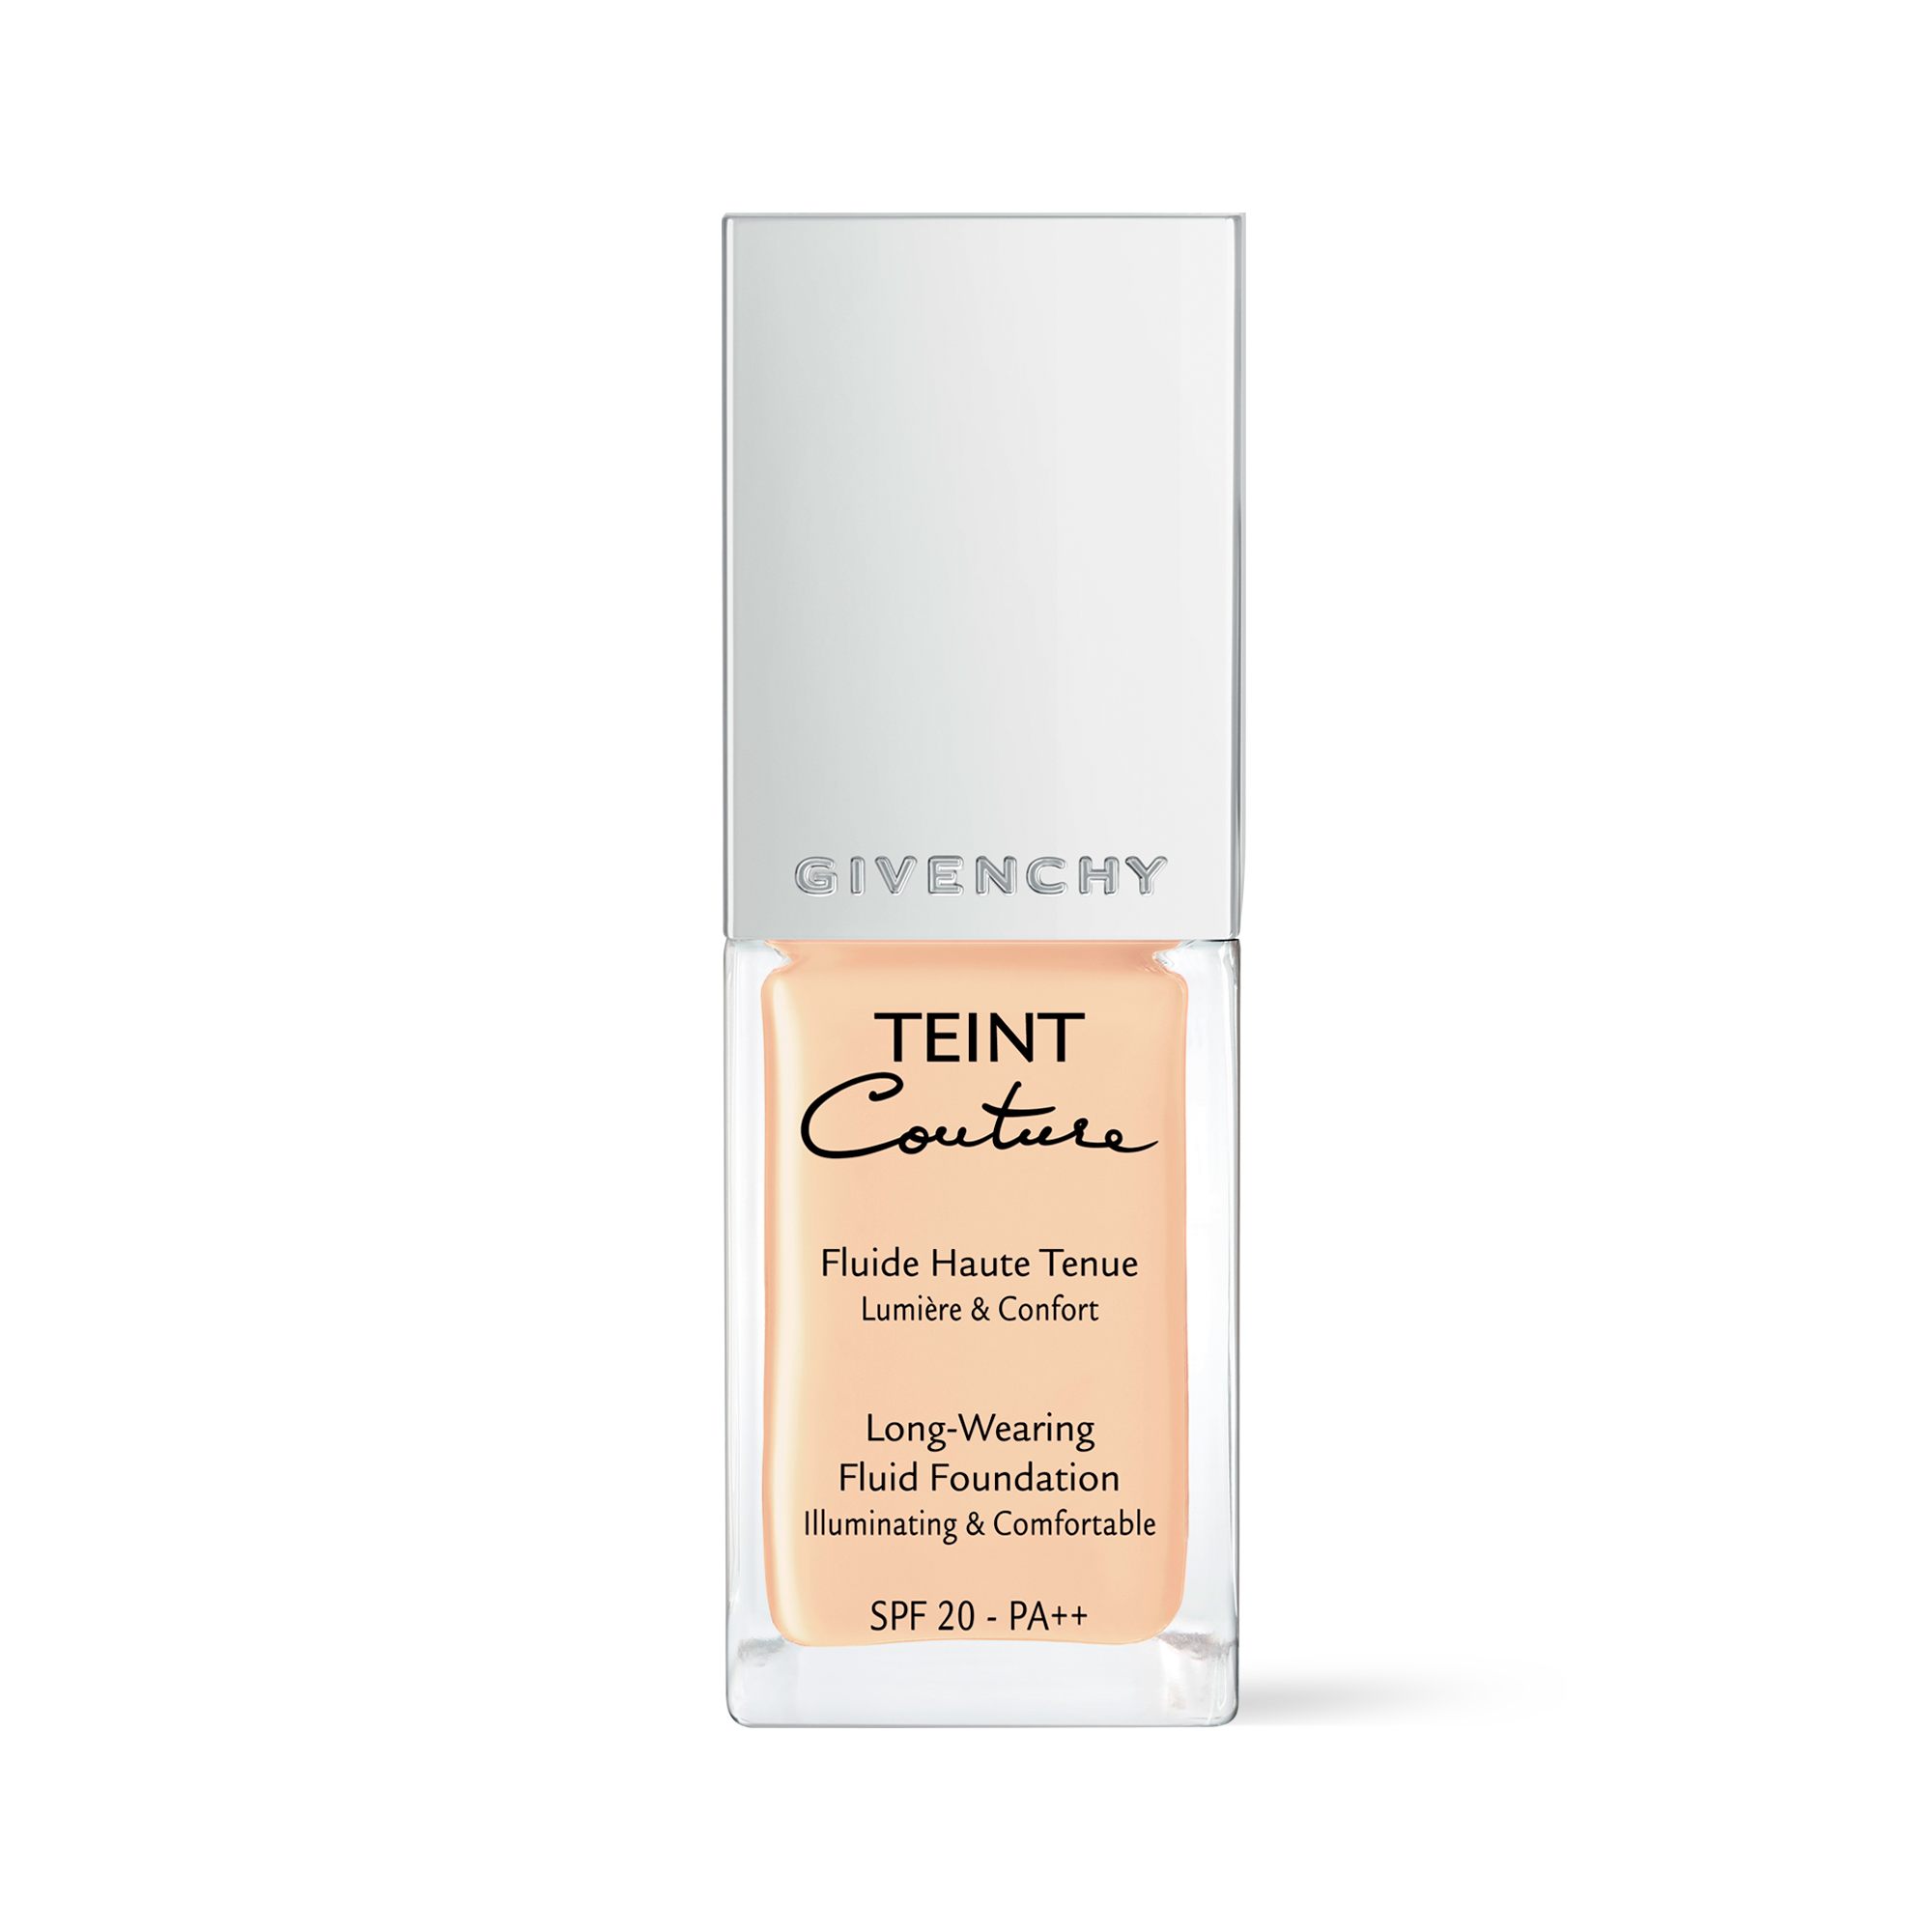 givenchy spf 20 teint couture long wearing fluid foundation